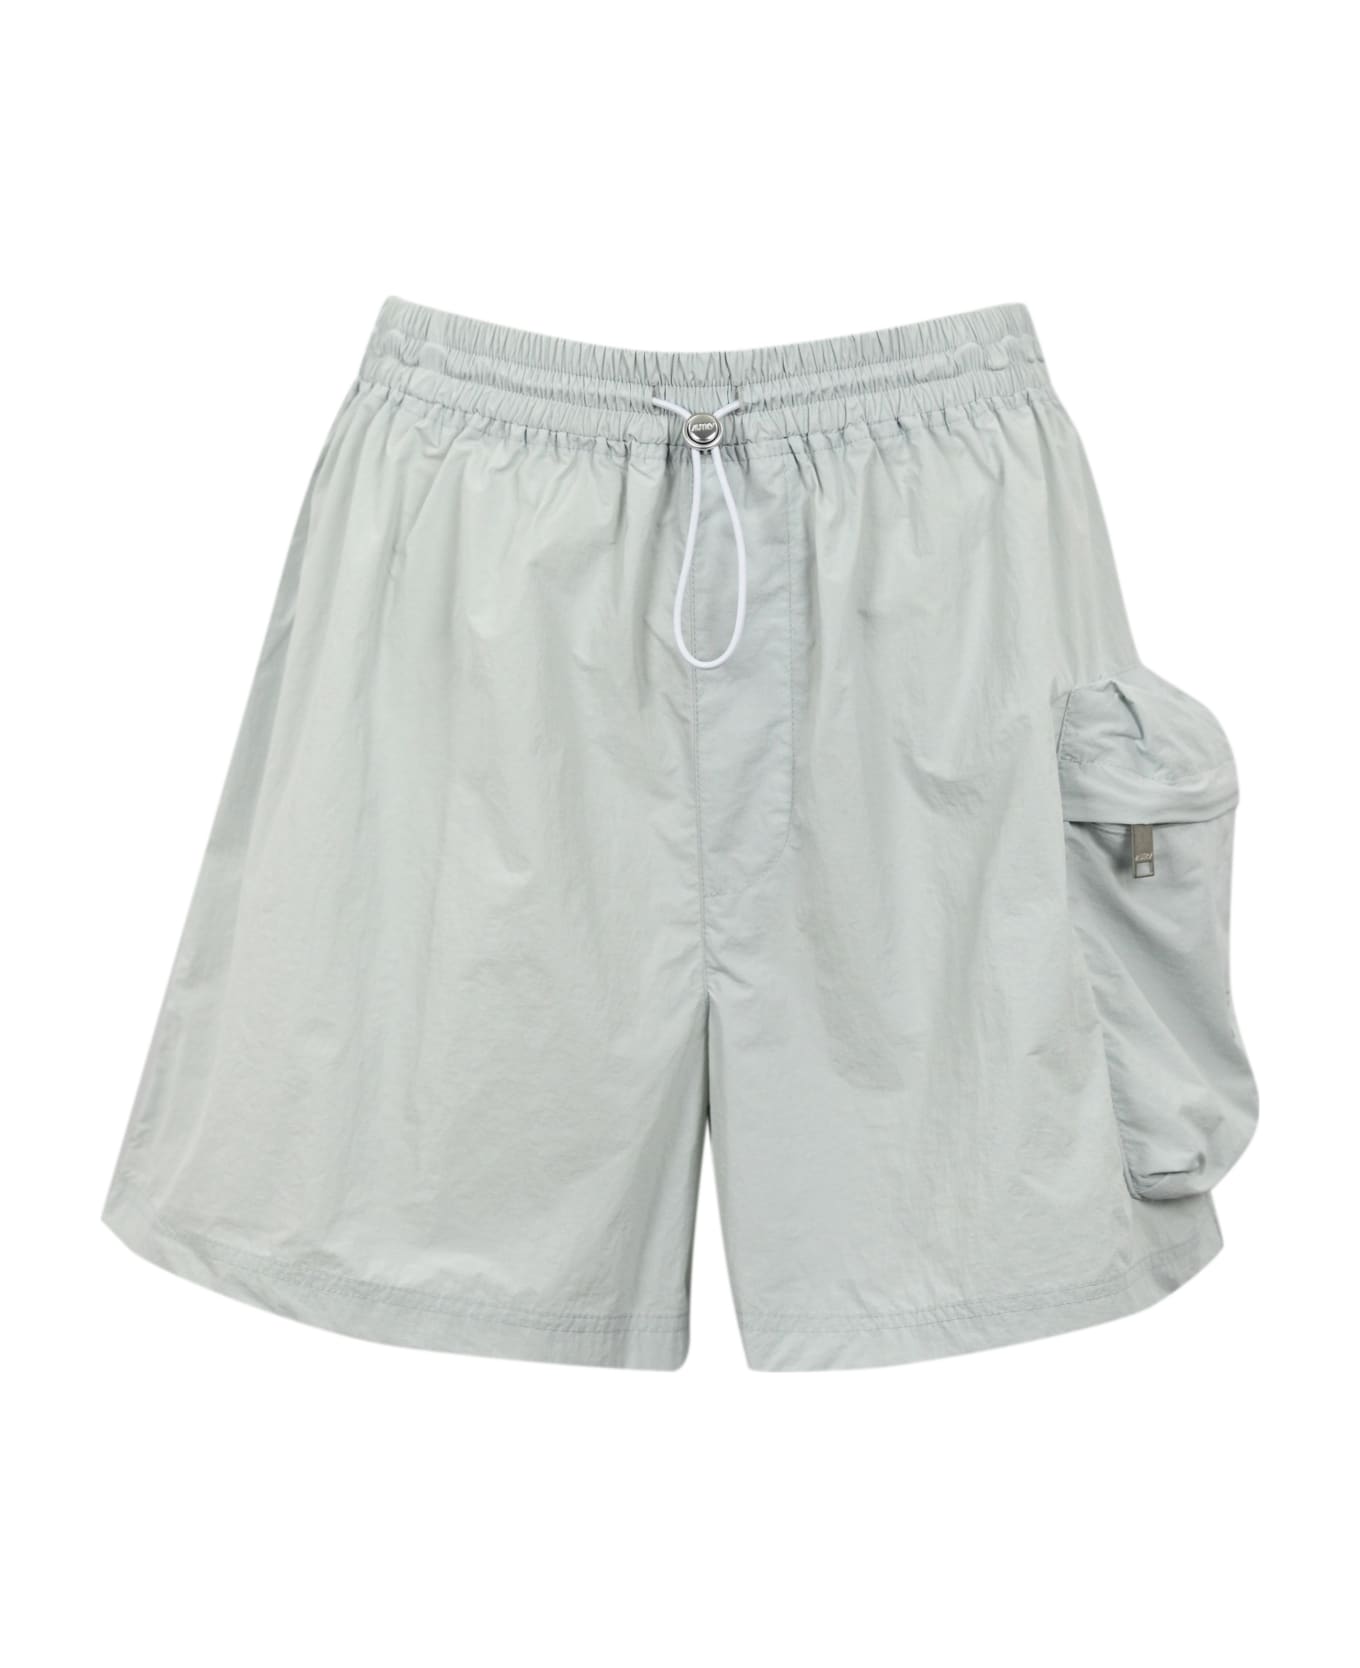 Autry Cargo Shorts With Logo - Blue